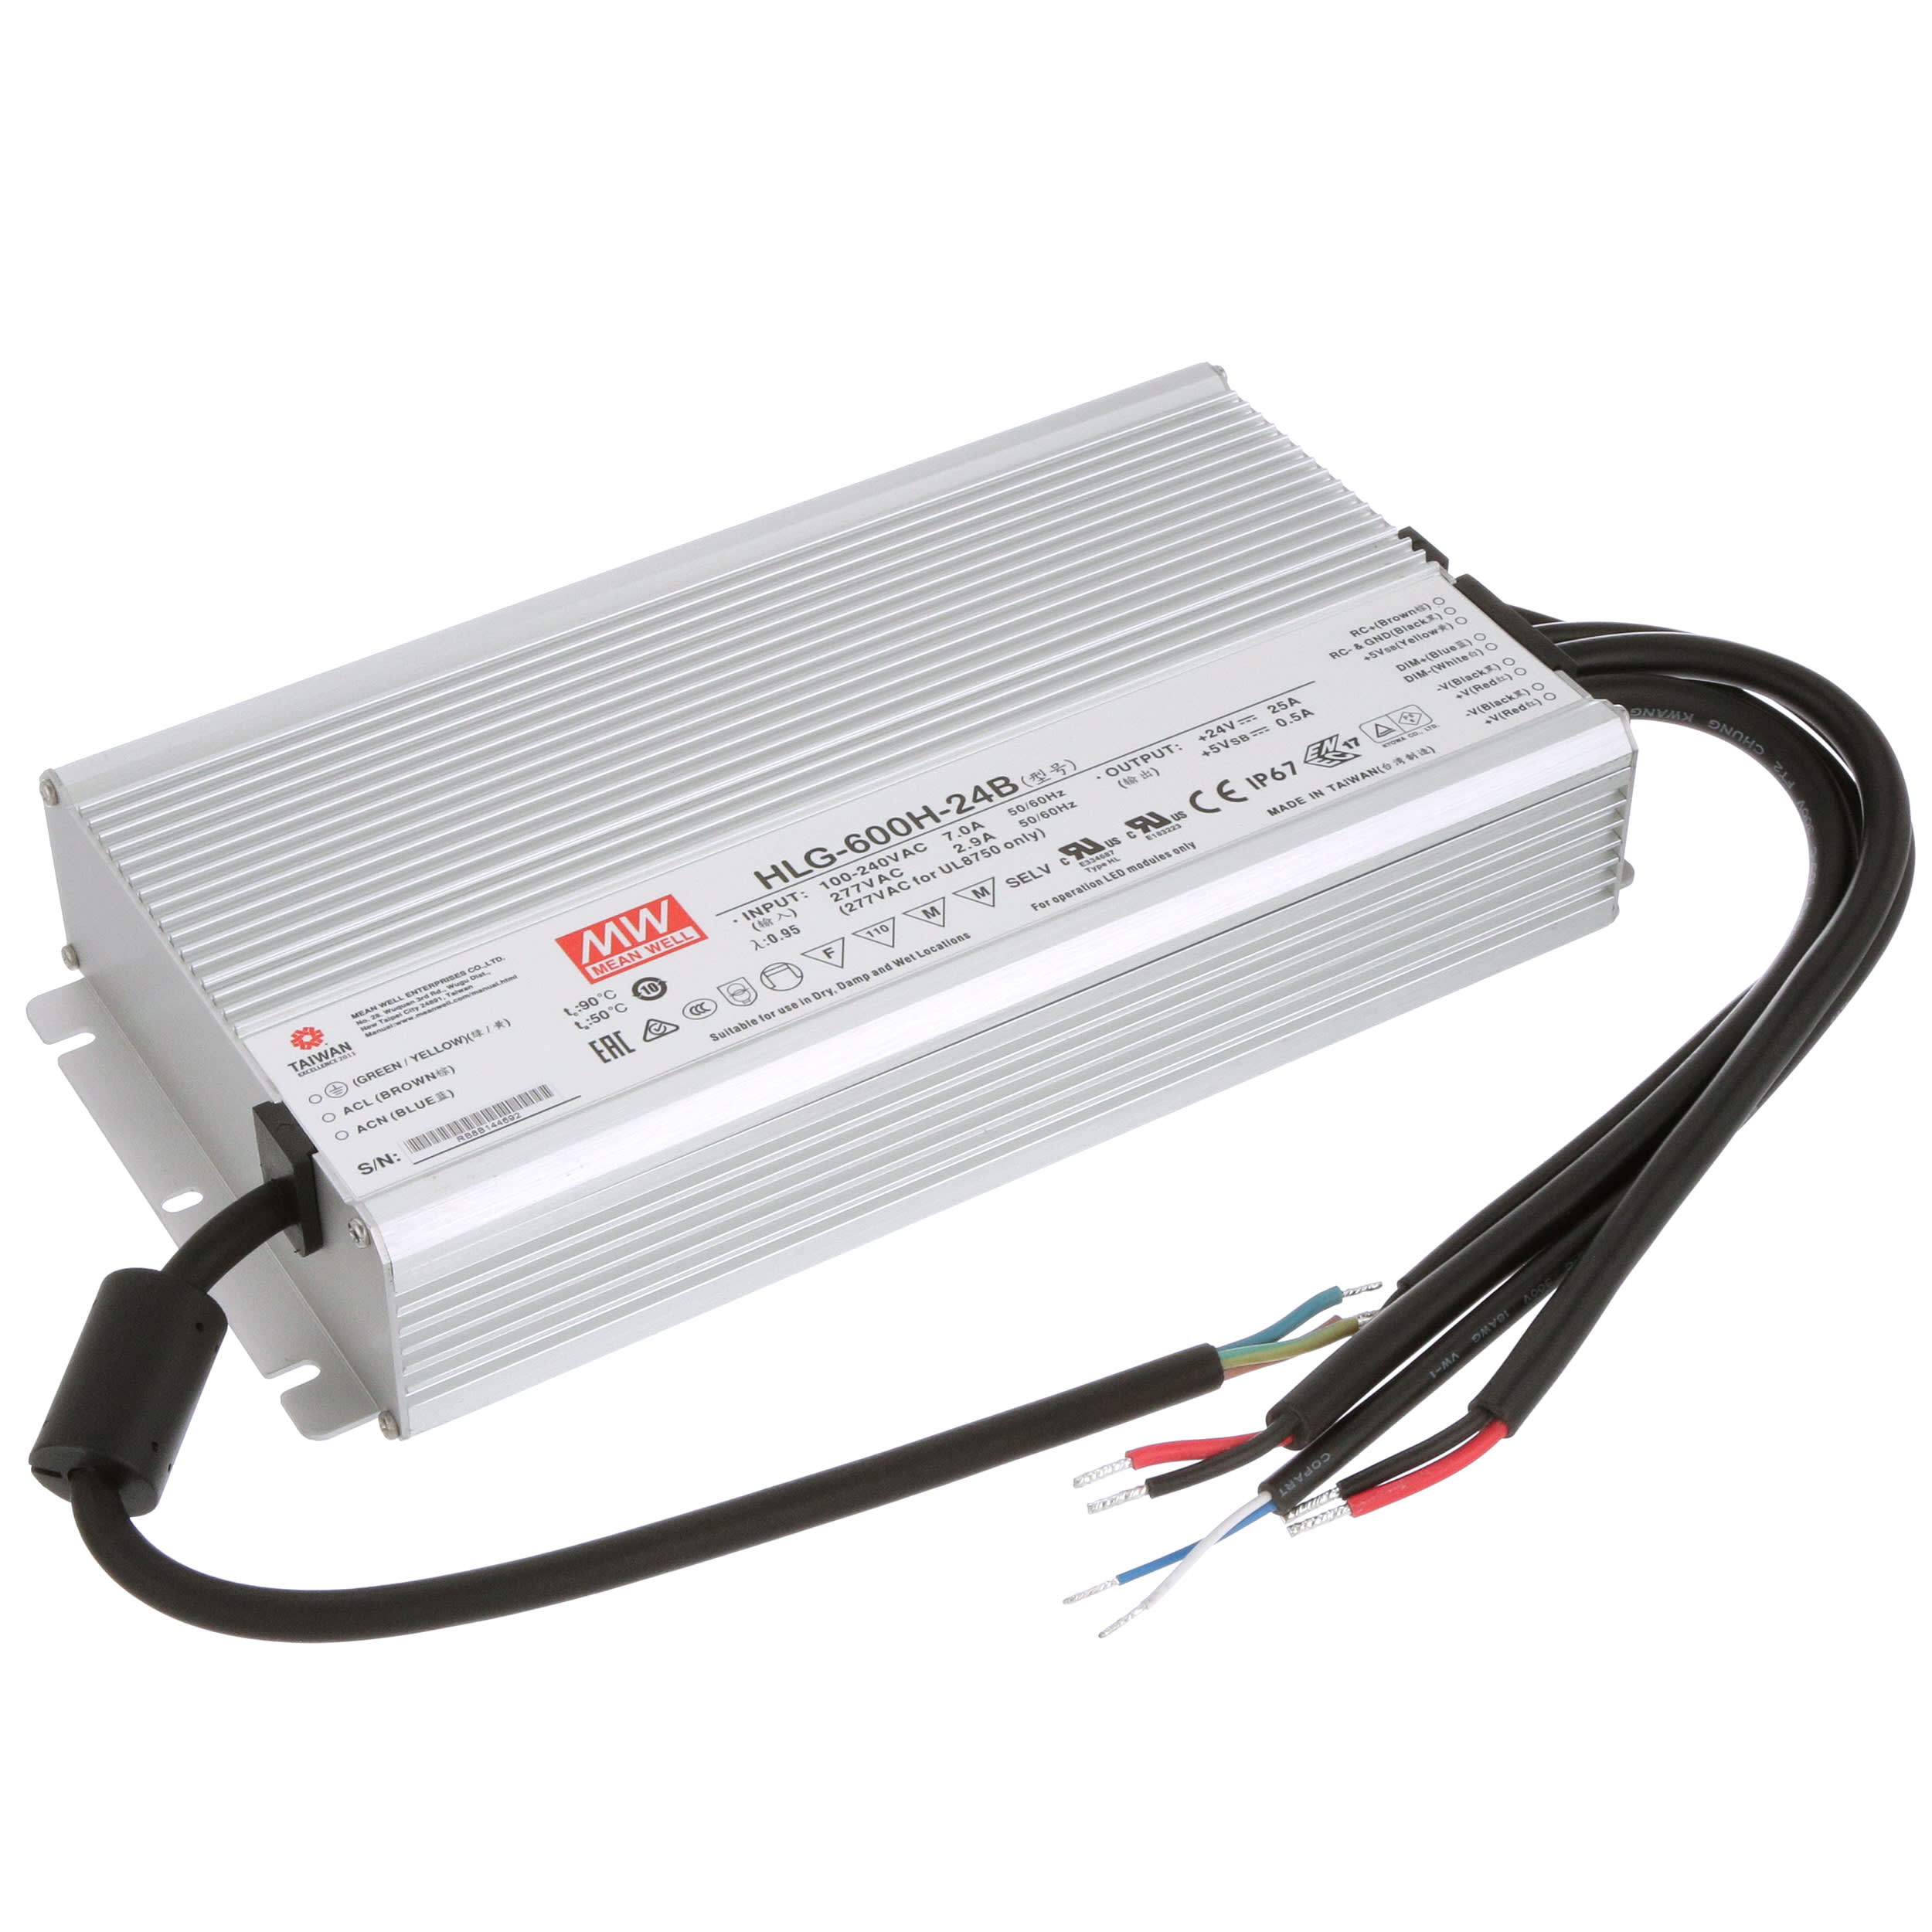 Mean Well Hlg-600h-48a LED Driver 600w Power Supply for sale online